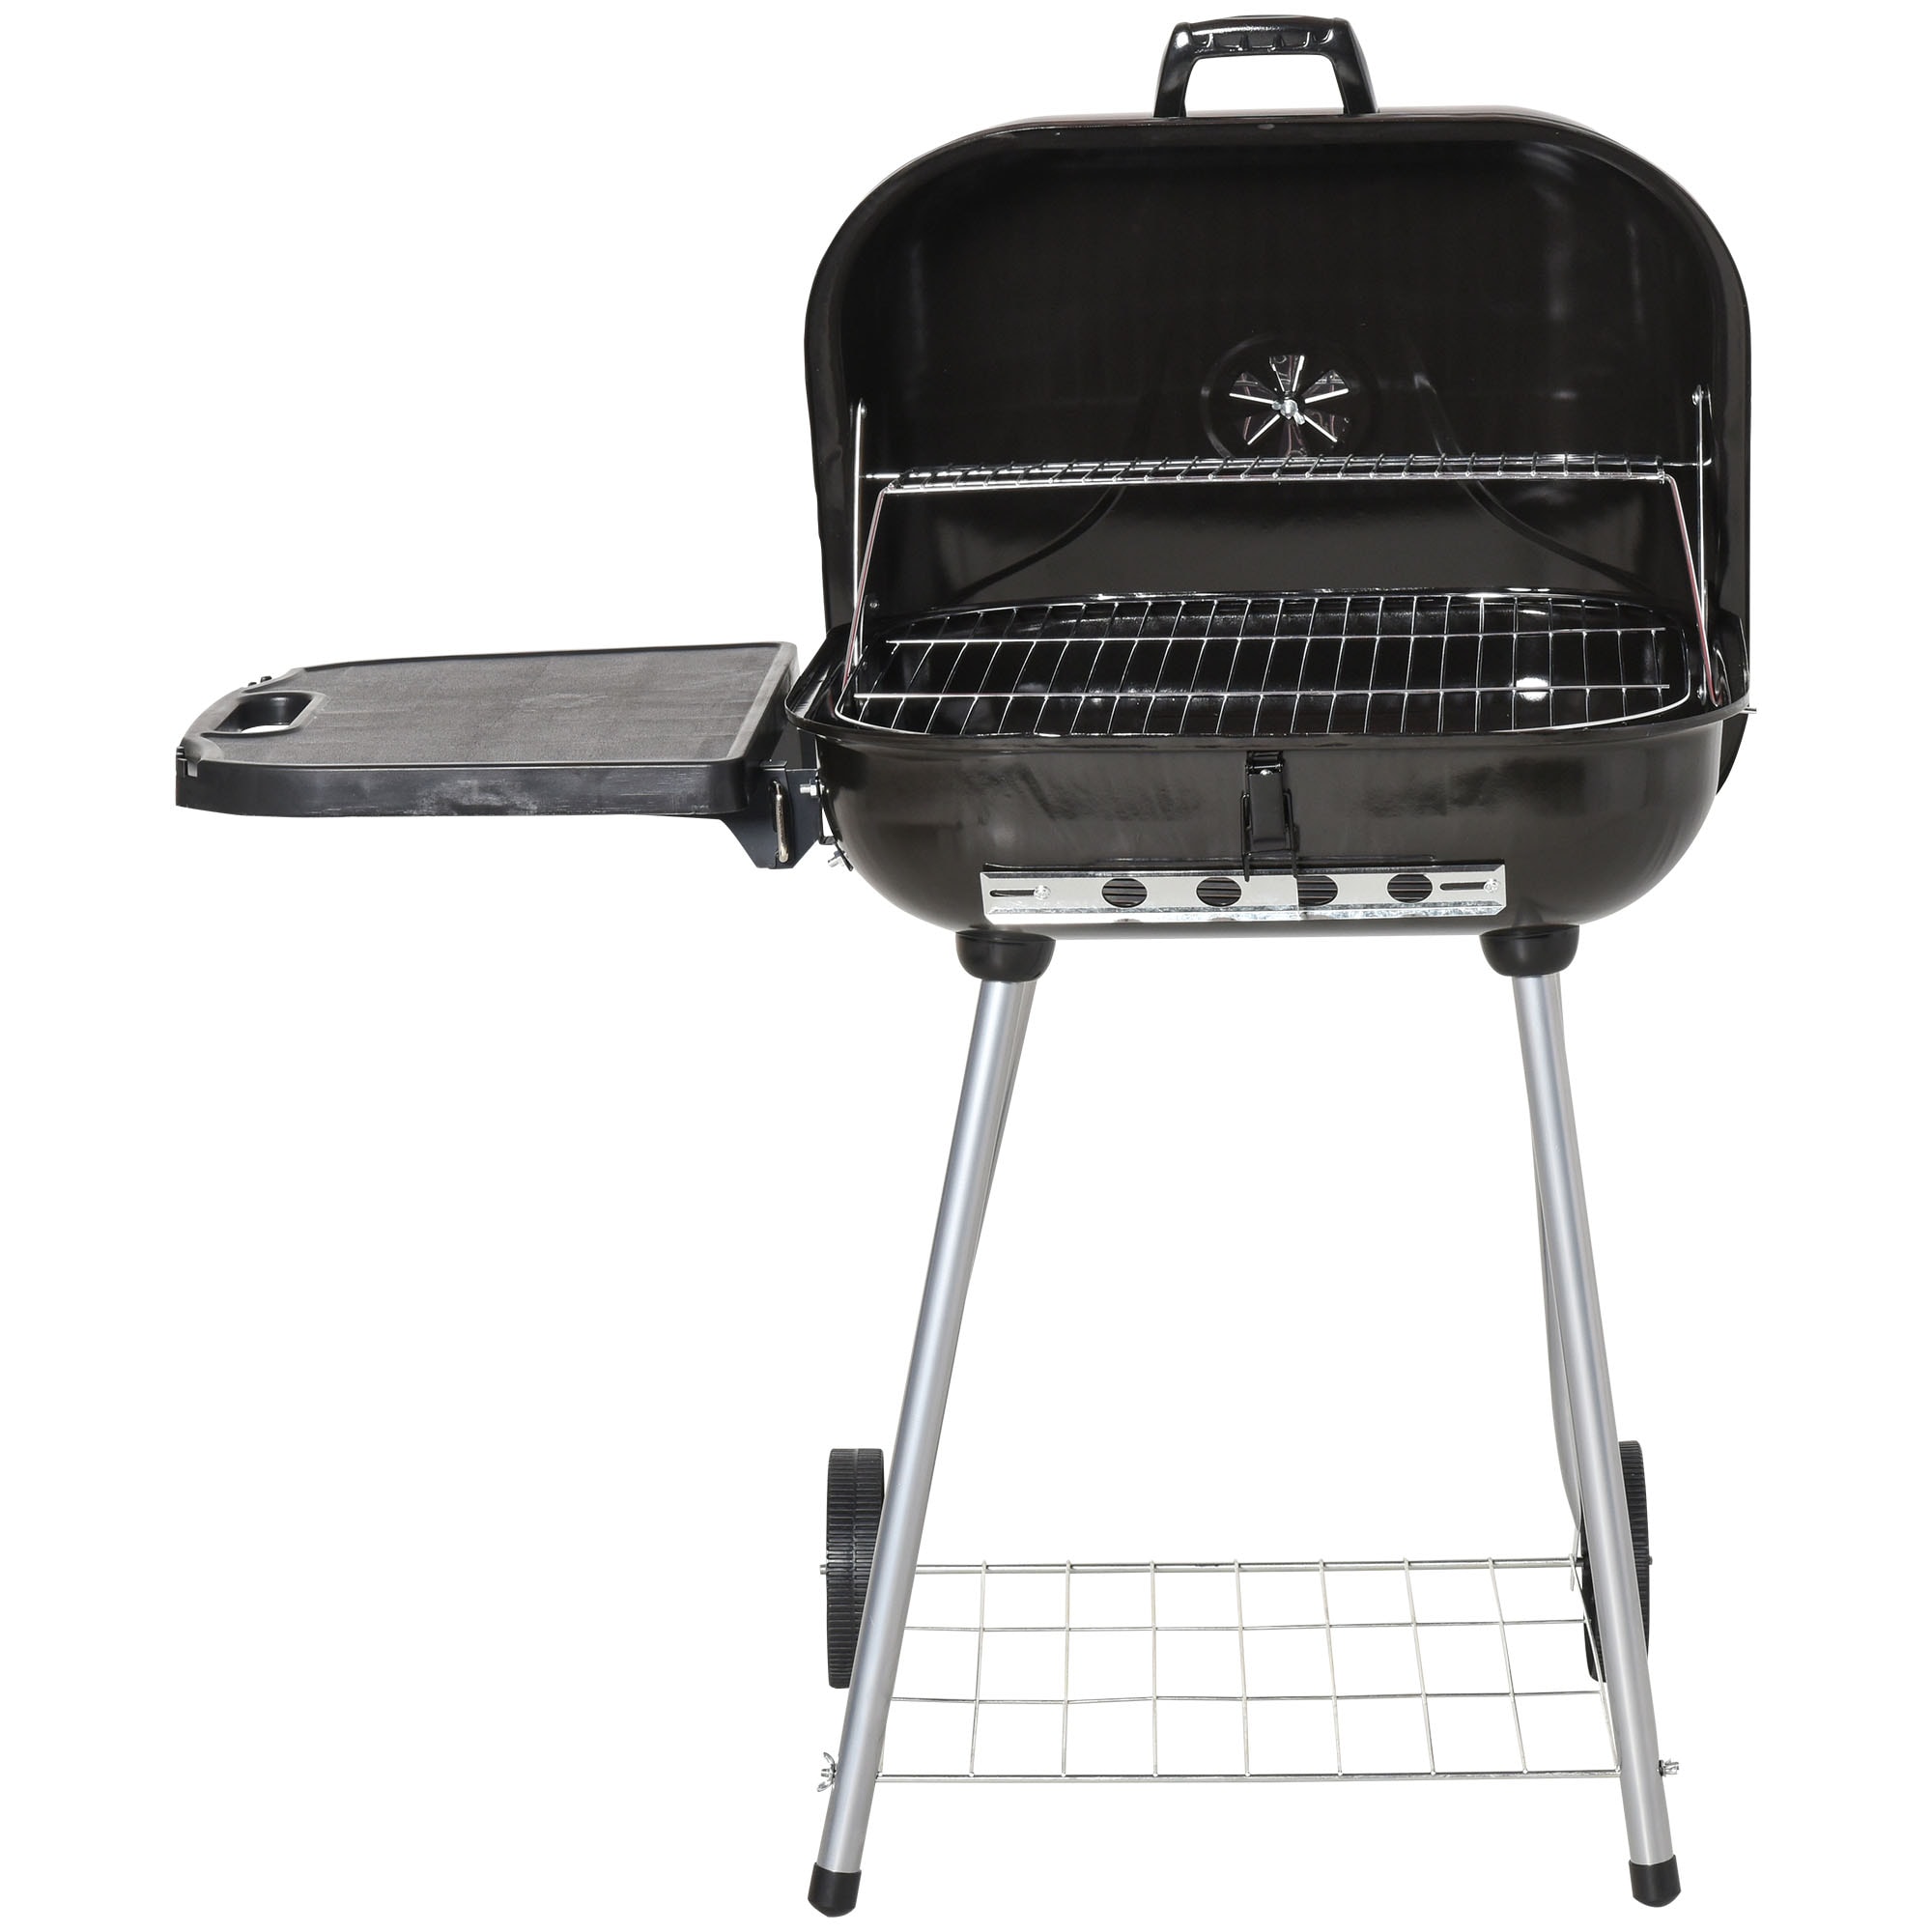 Outsunny 37.5 Steel Square Portable Outdoor Backyard Charcoal Barbecue Grill with Lower Shelf and Tray